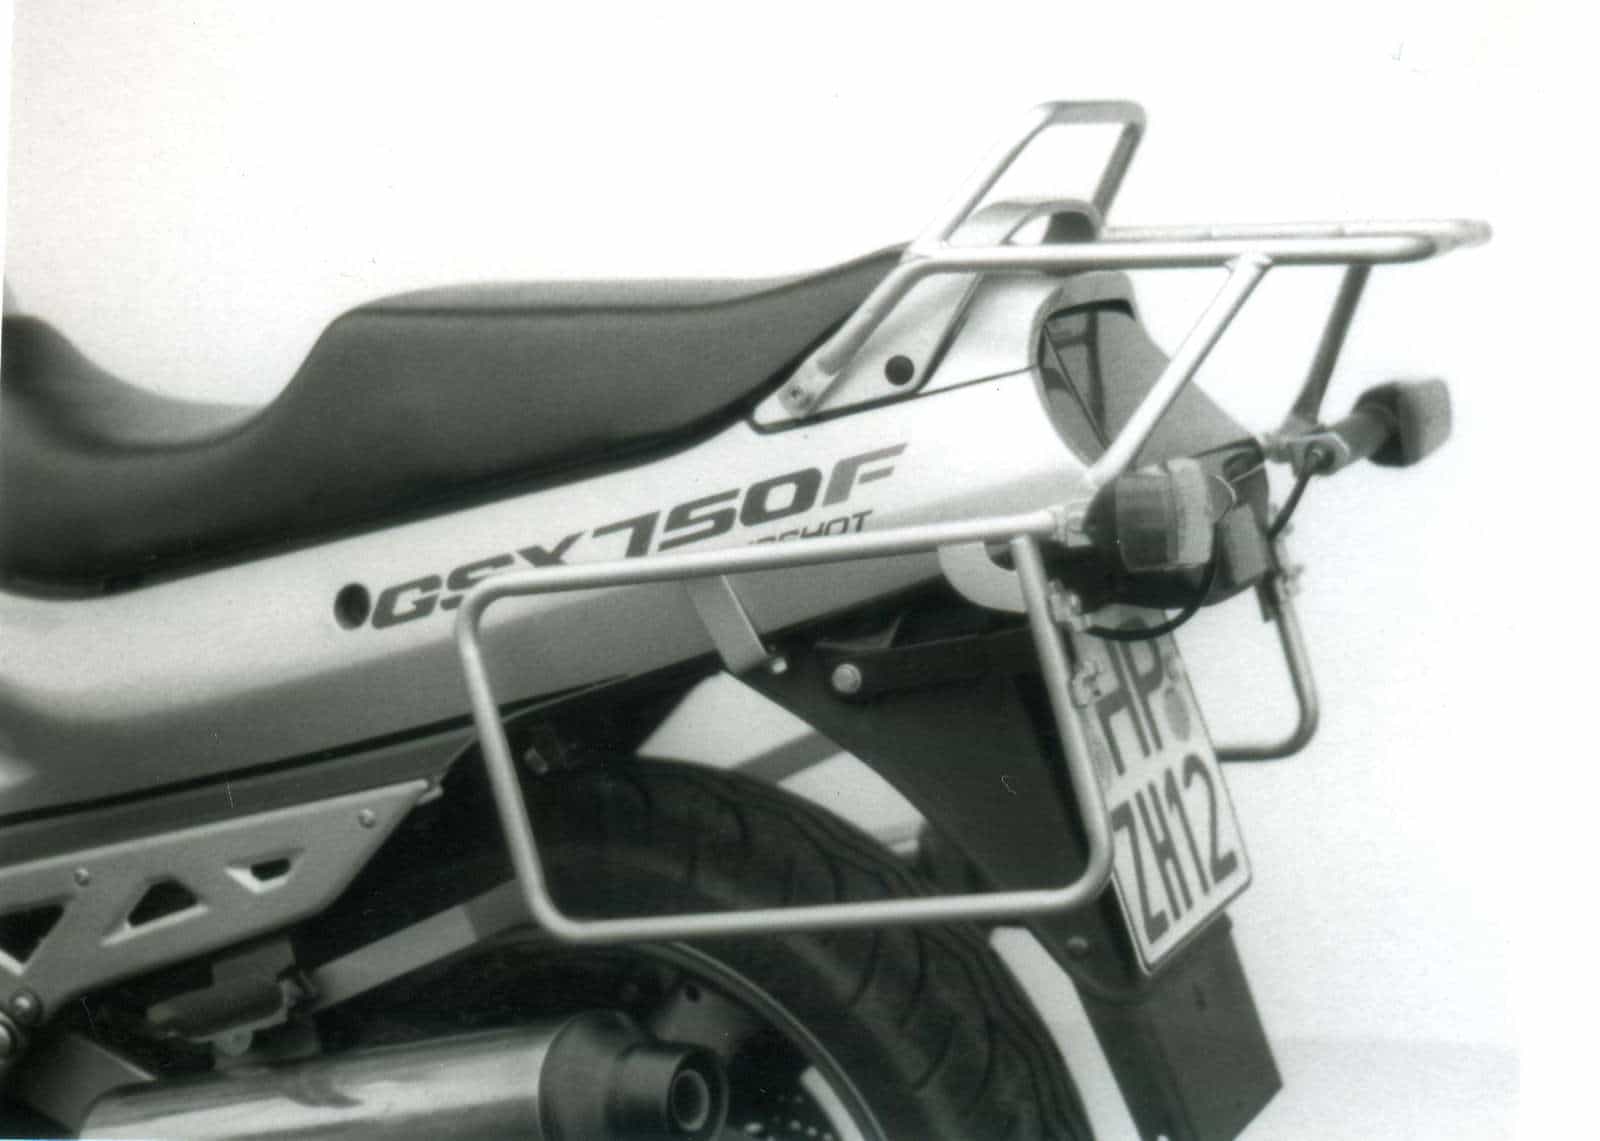 Complete carrier set (side- and topcase carrier) black for Suzuki GSX 750 F (1989-1997)